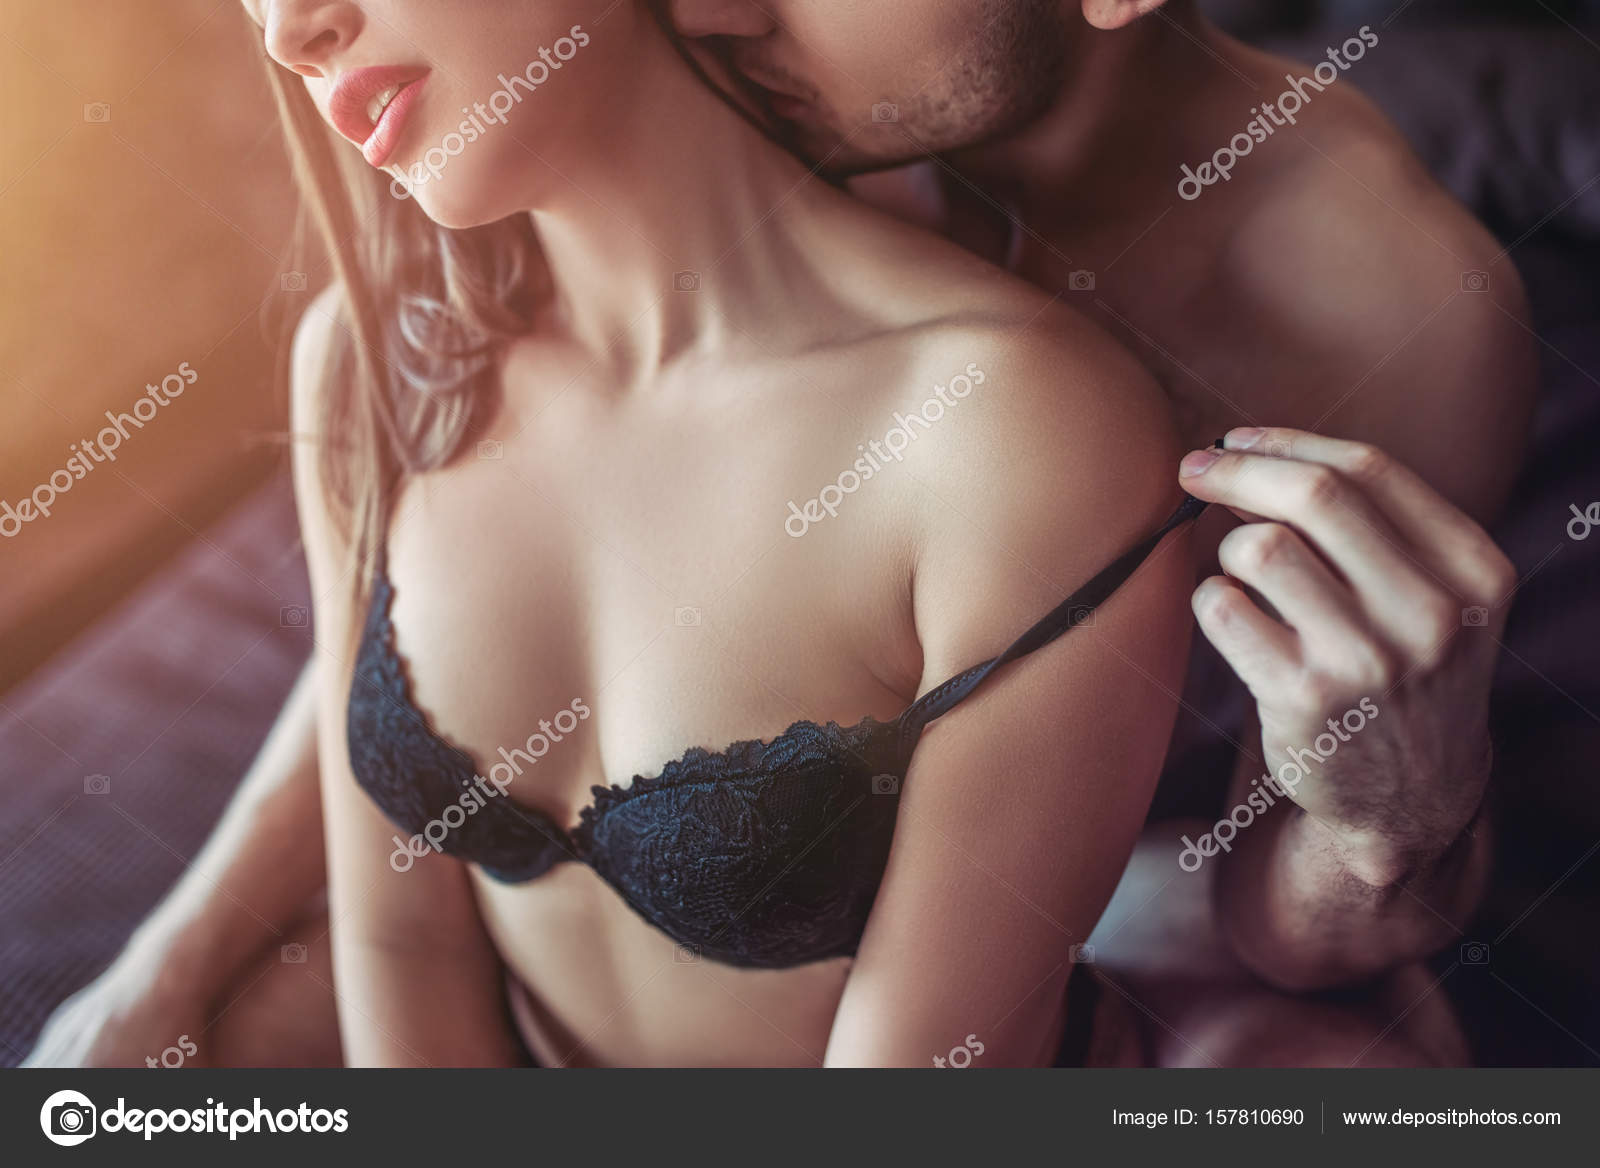 Couple Having Sex On Bed